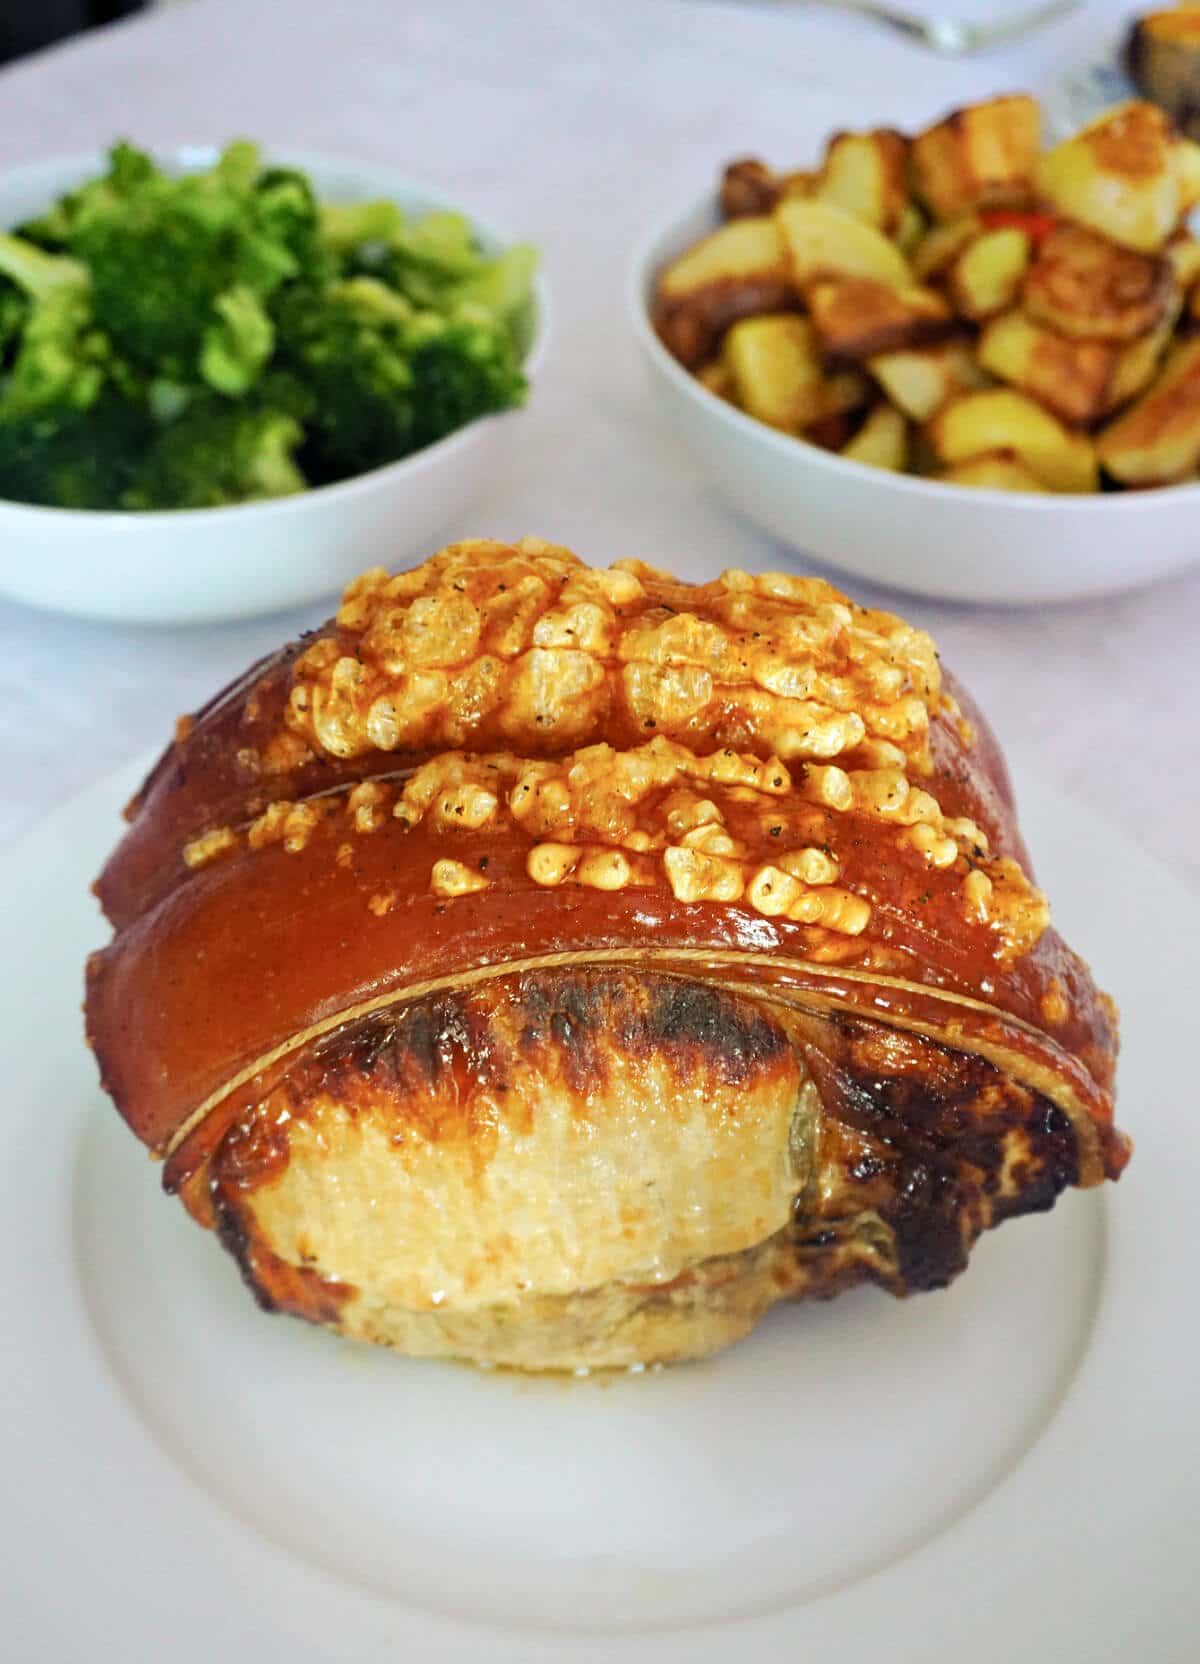 A roast pork joint on a white plate with broccoli and roasties behind